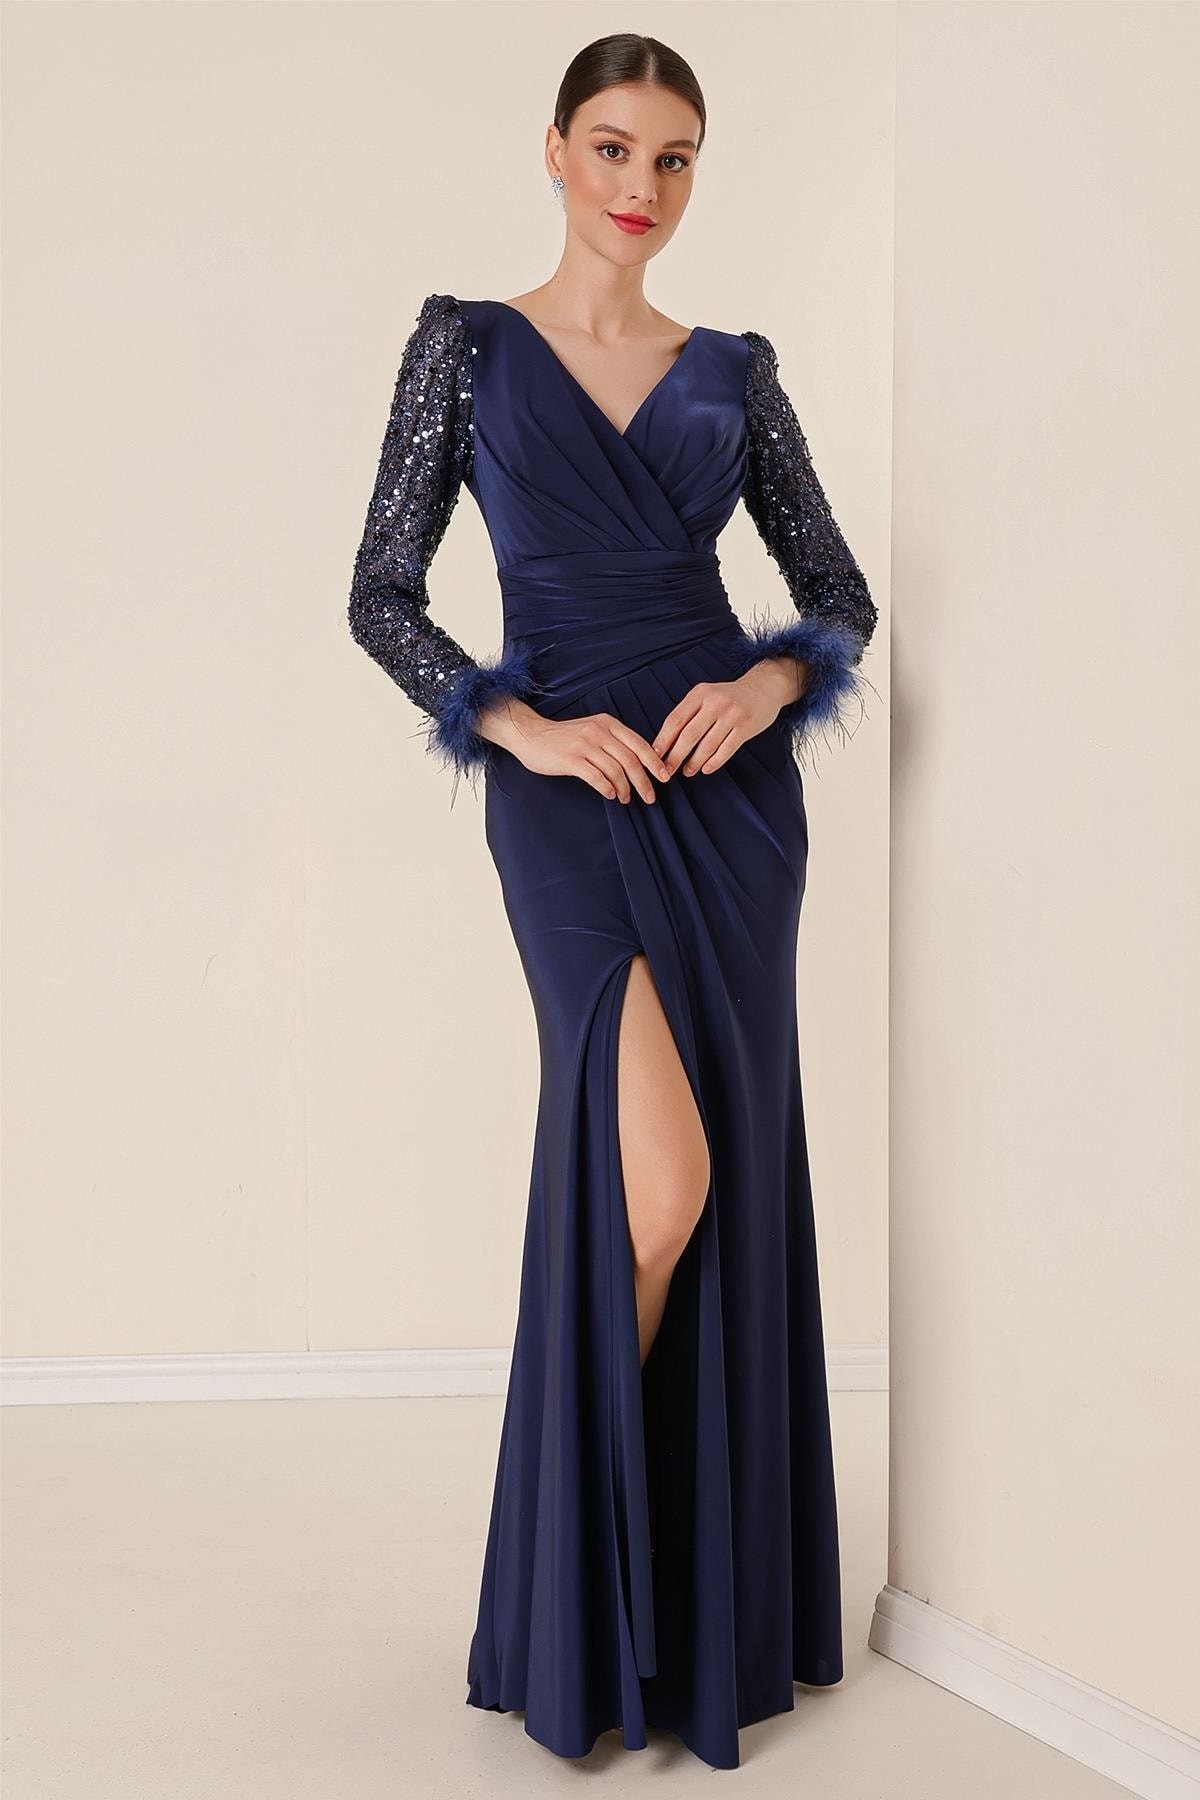 By Saygı Double Breasted Collar Front Draped Sleeves Sequin Feather Detailed Lined Lycra Long Dress Navy Blue